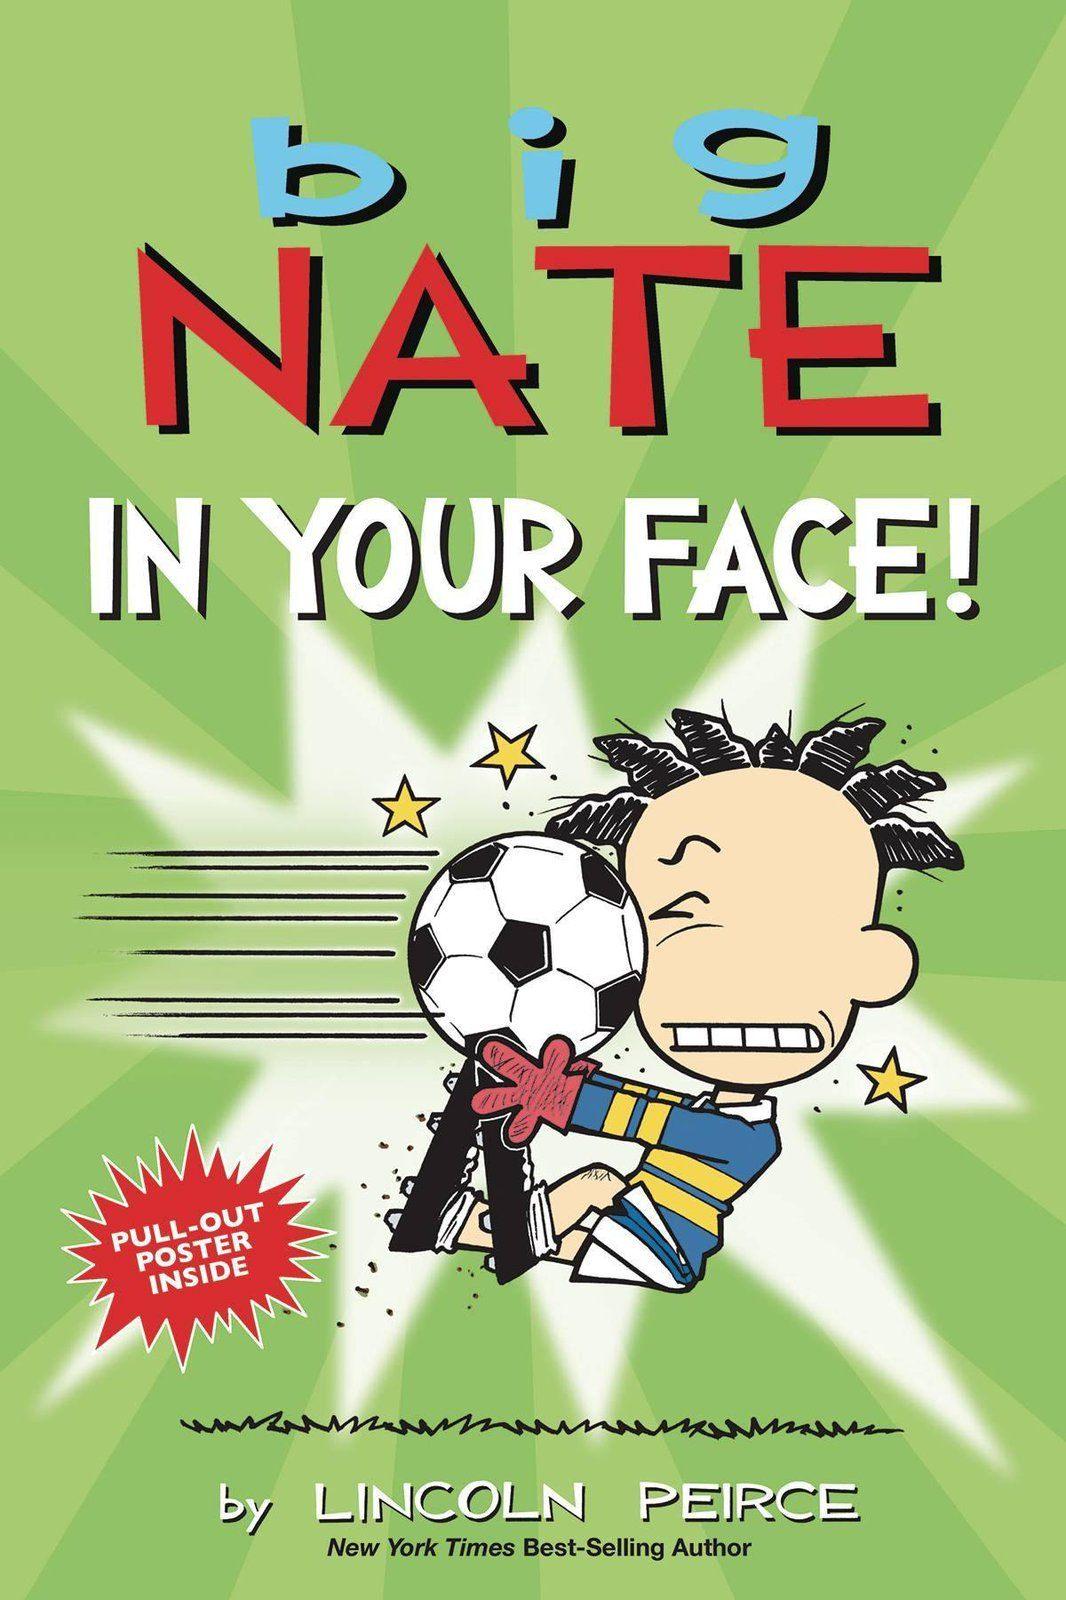 BIG NATE IN YOUR FACE GN (C: 0-1-0) (SHIPS 03-03-21) - PCKComics.com